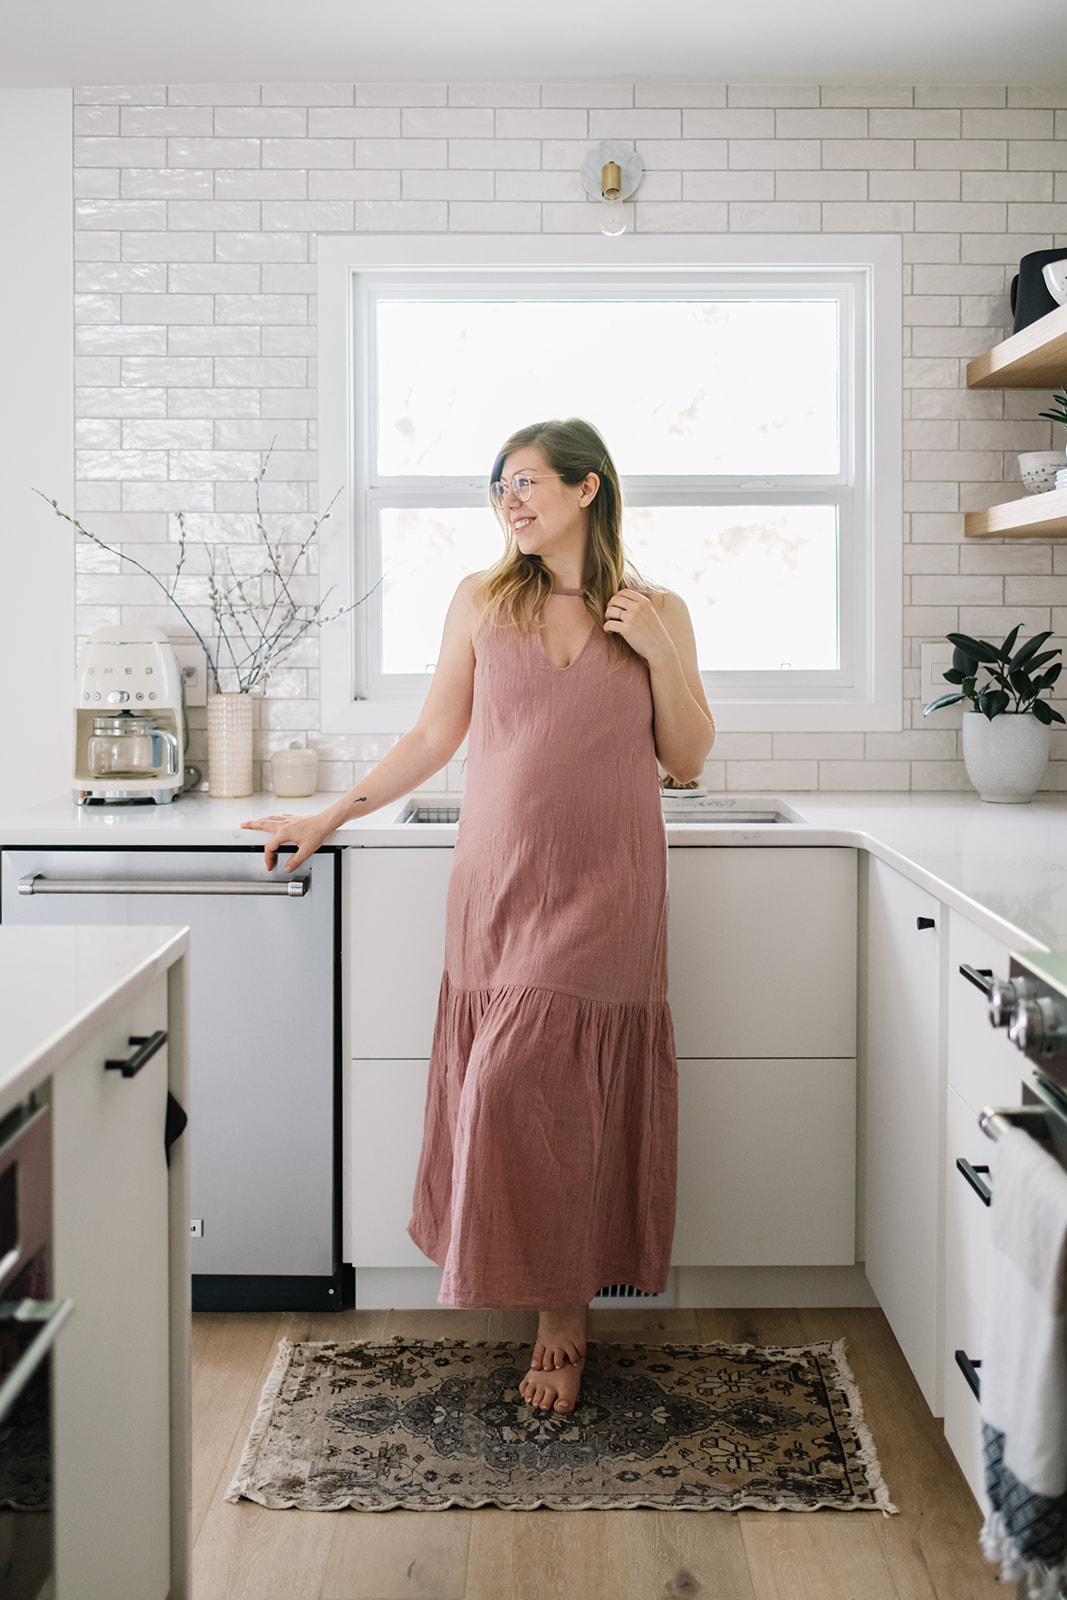 The Sprout Collection, maternity rental wardrobe